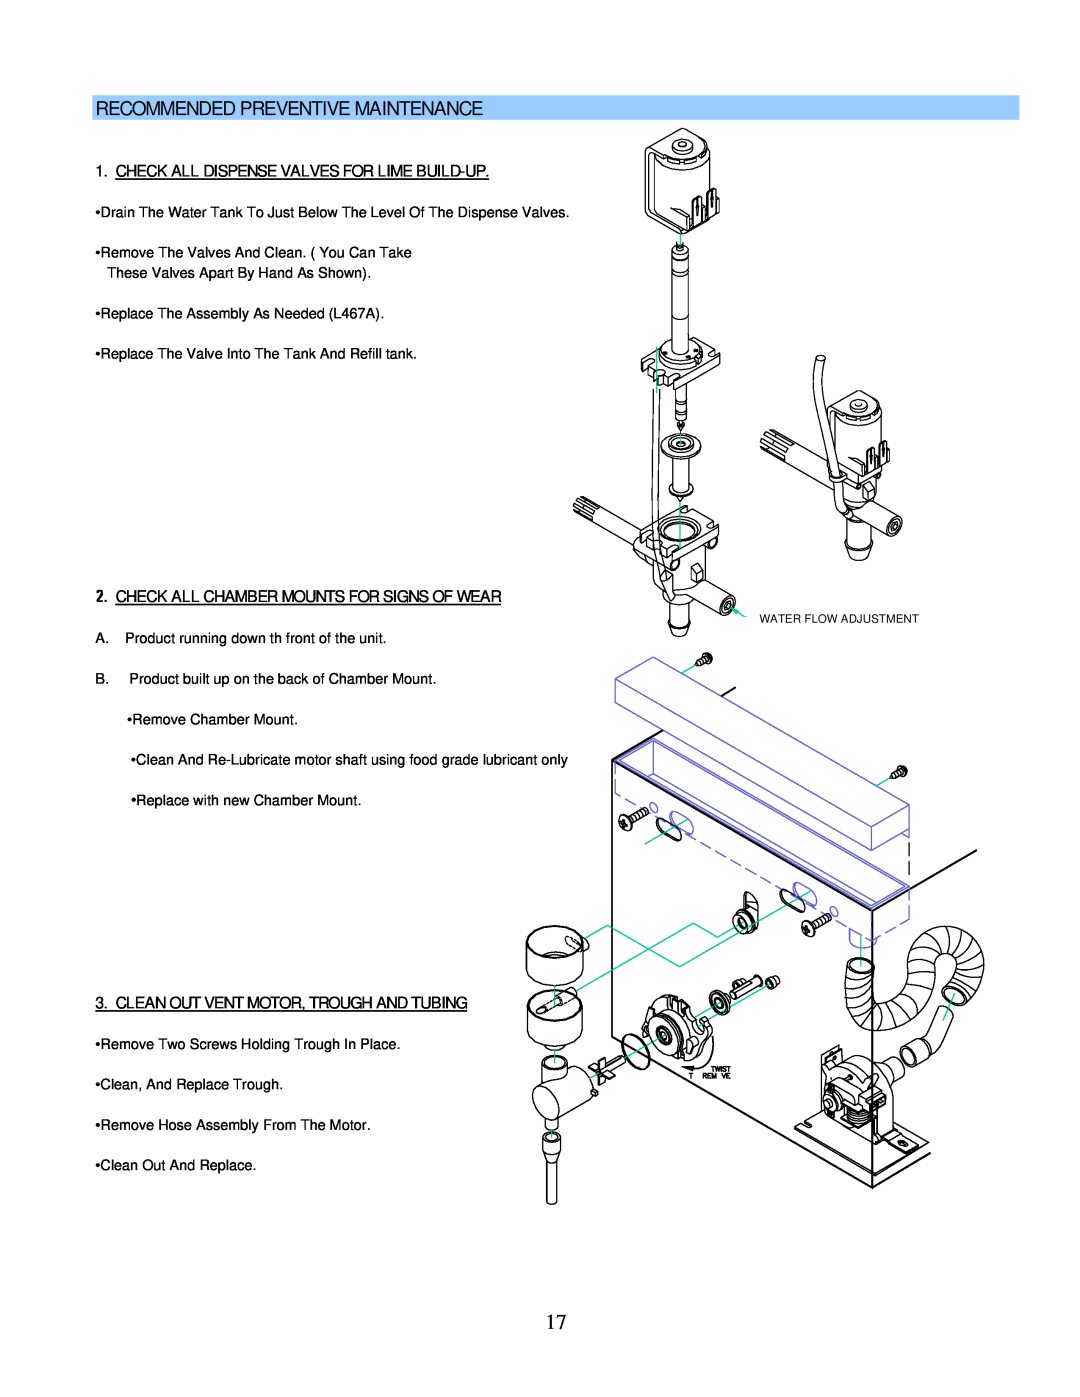 Cecilware GB-IT operation manual Recommended Preventive Maintenance, Check All Dispense Valves For Lime Build-Up 